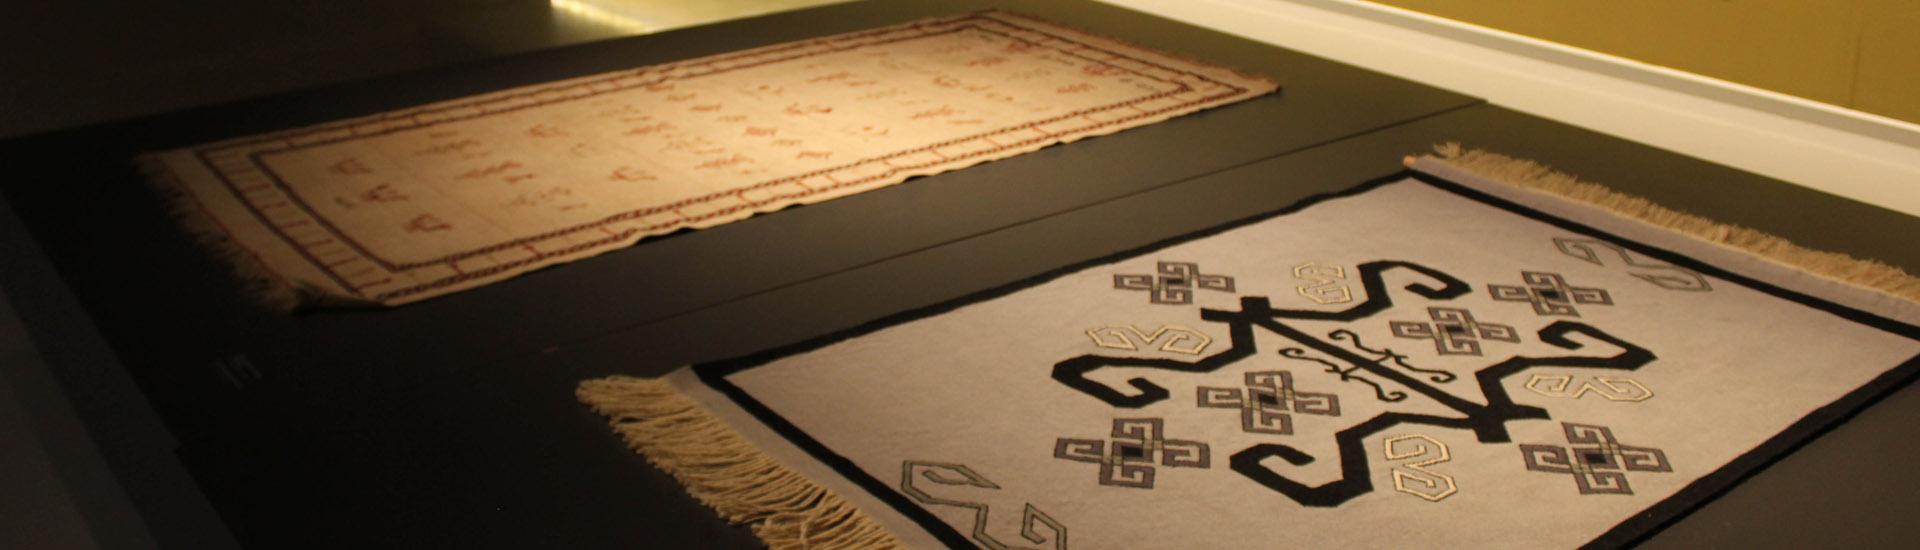 Cover image of this place Xalça Muzeyi / Carpet Museum